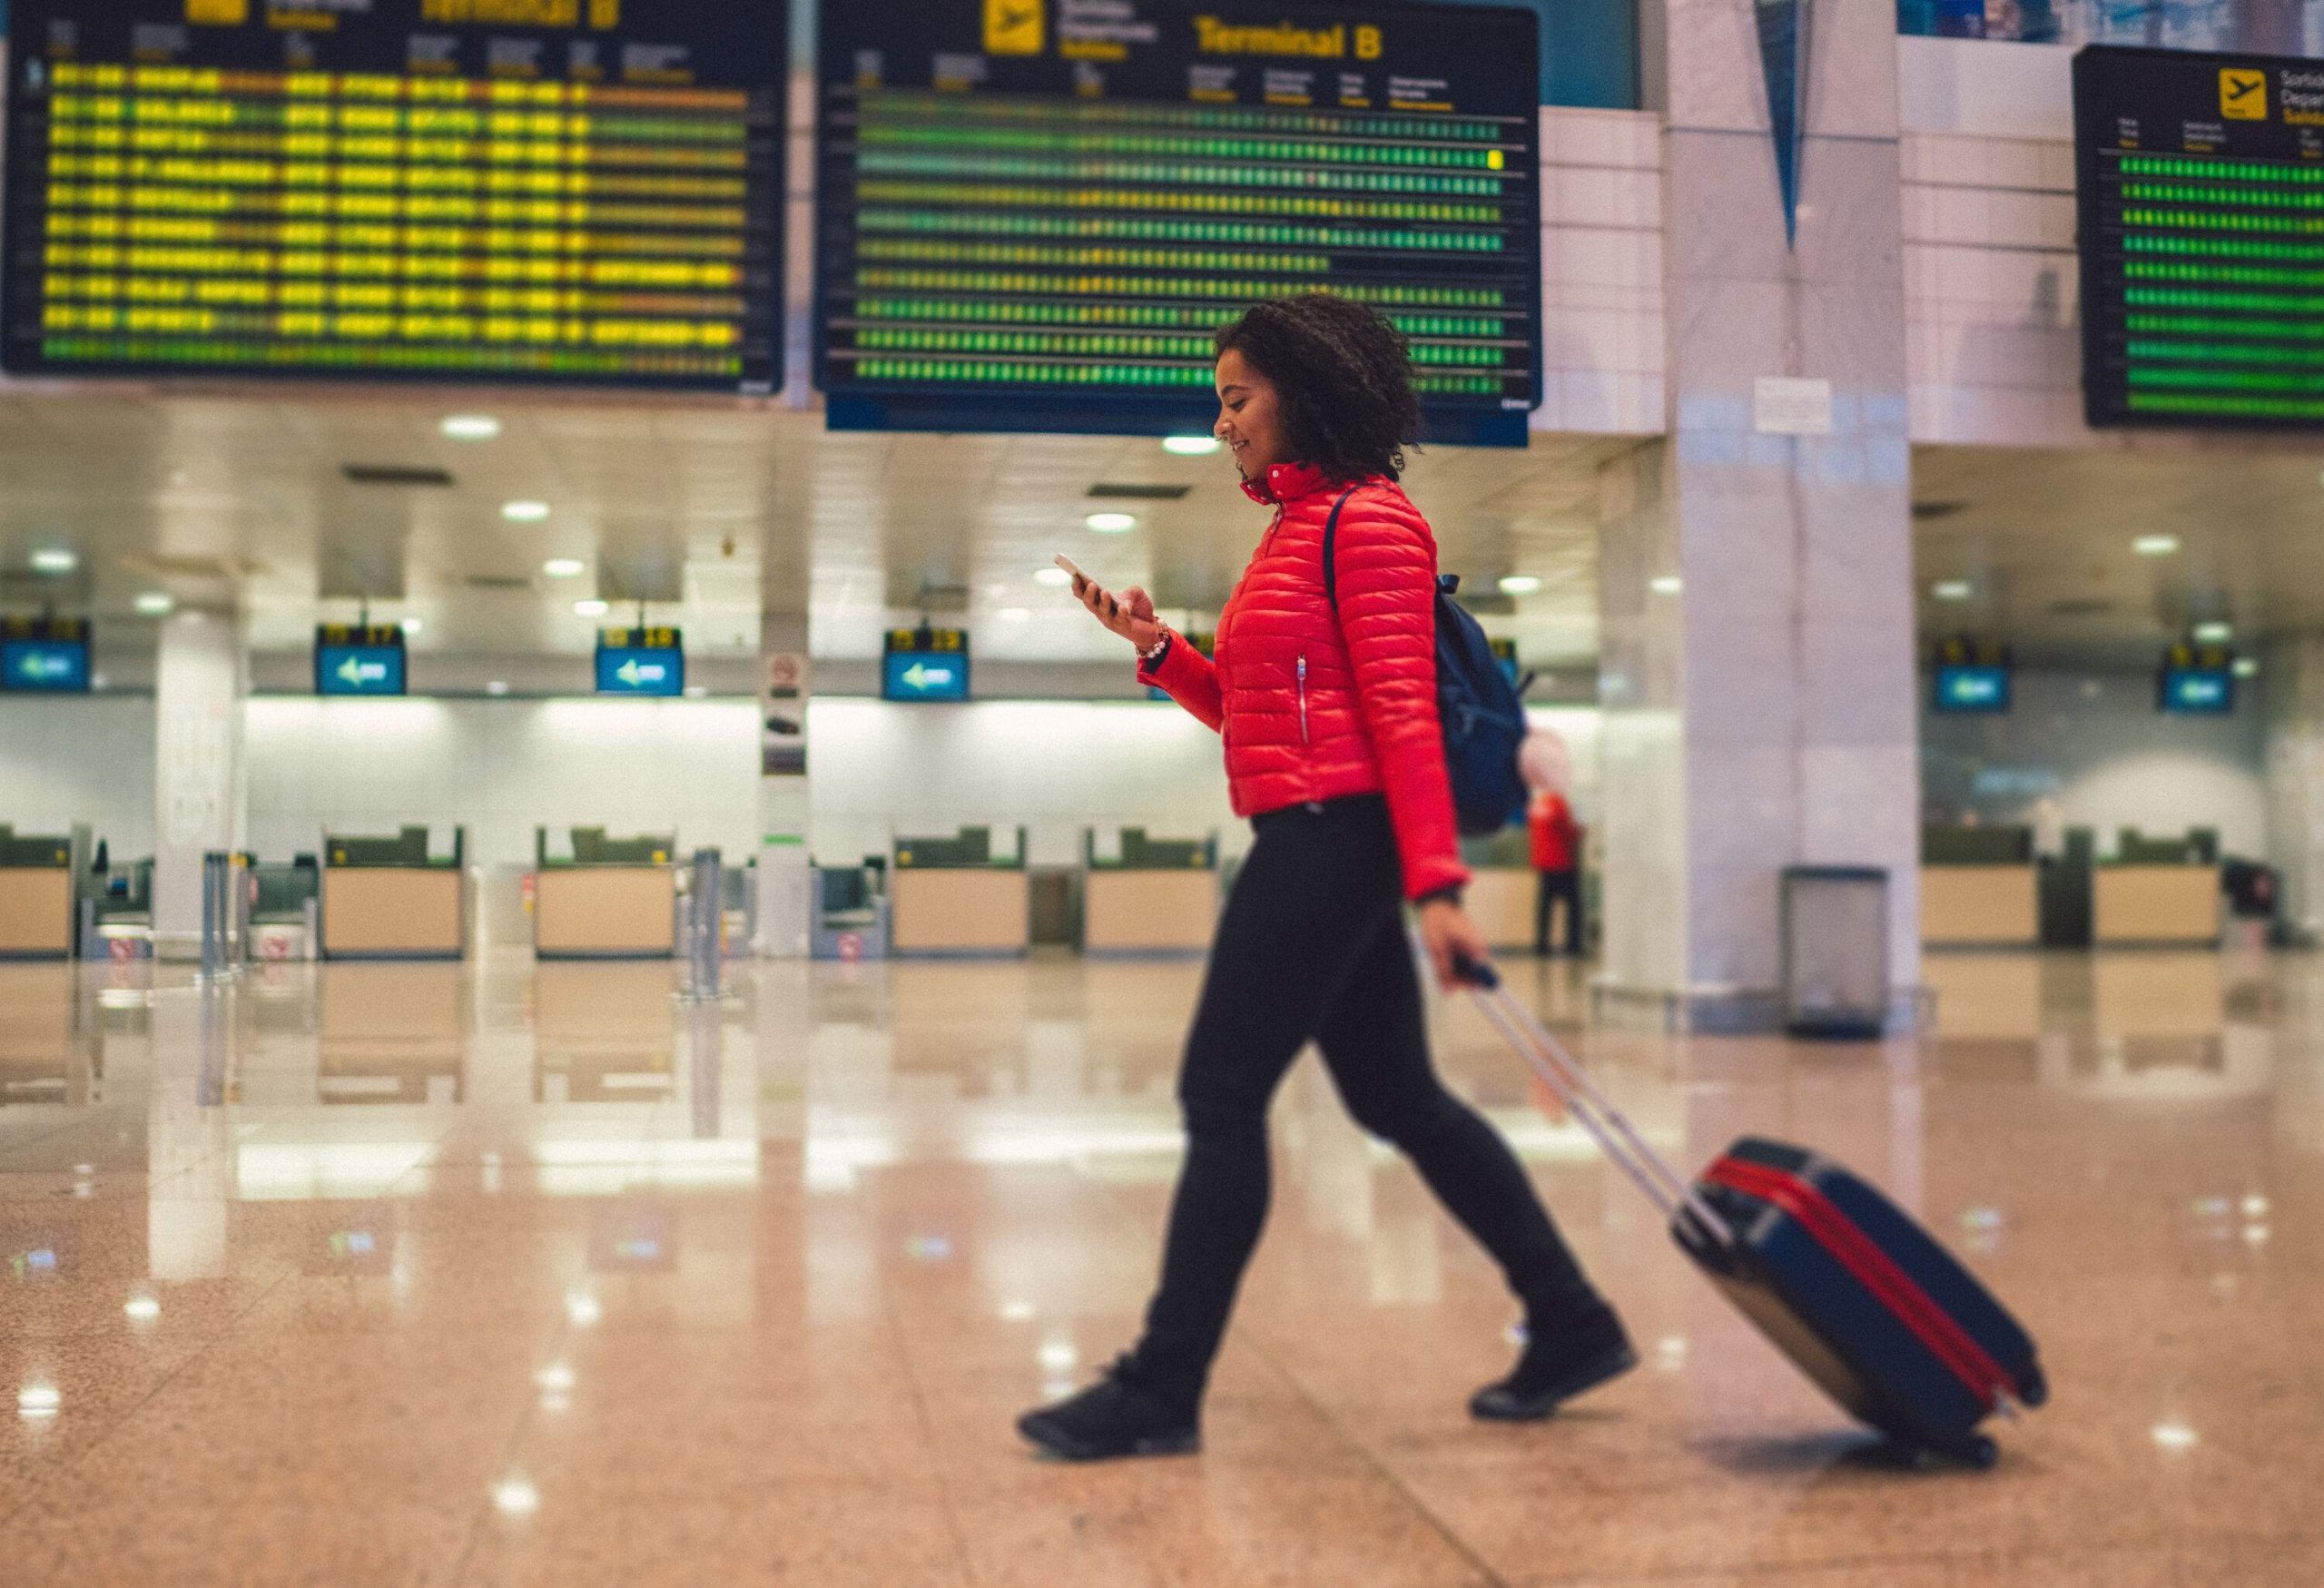 A woman in a red jacket checking her phone while hauling her luggage through the airport.